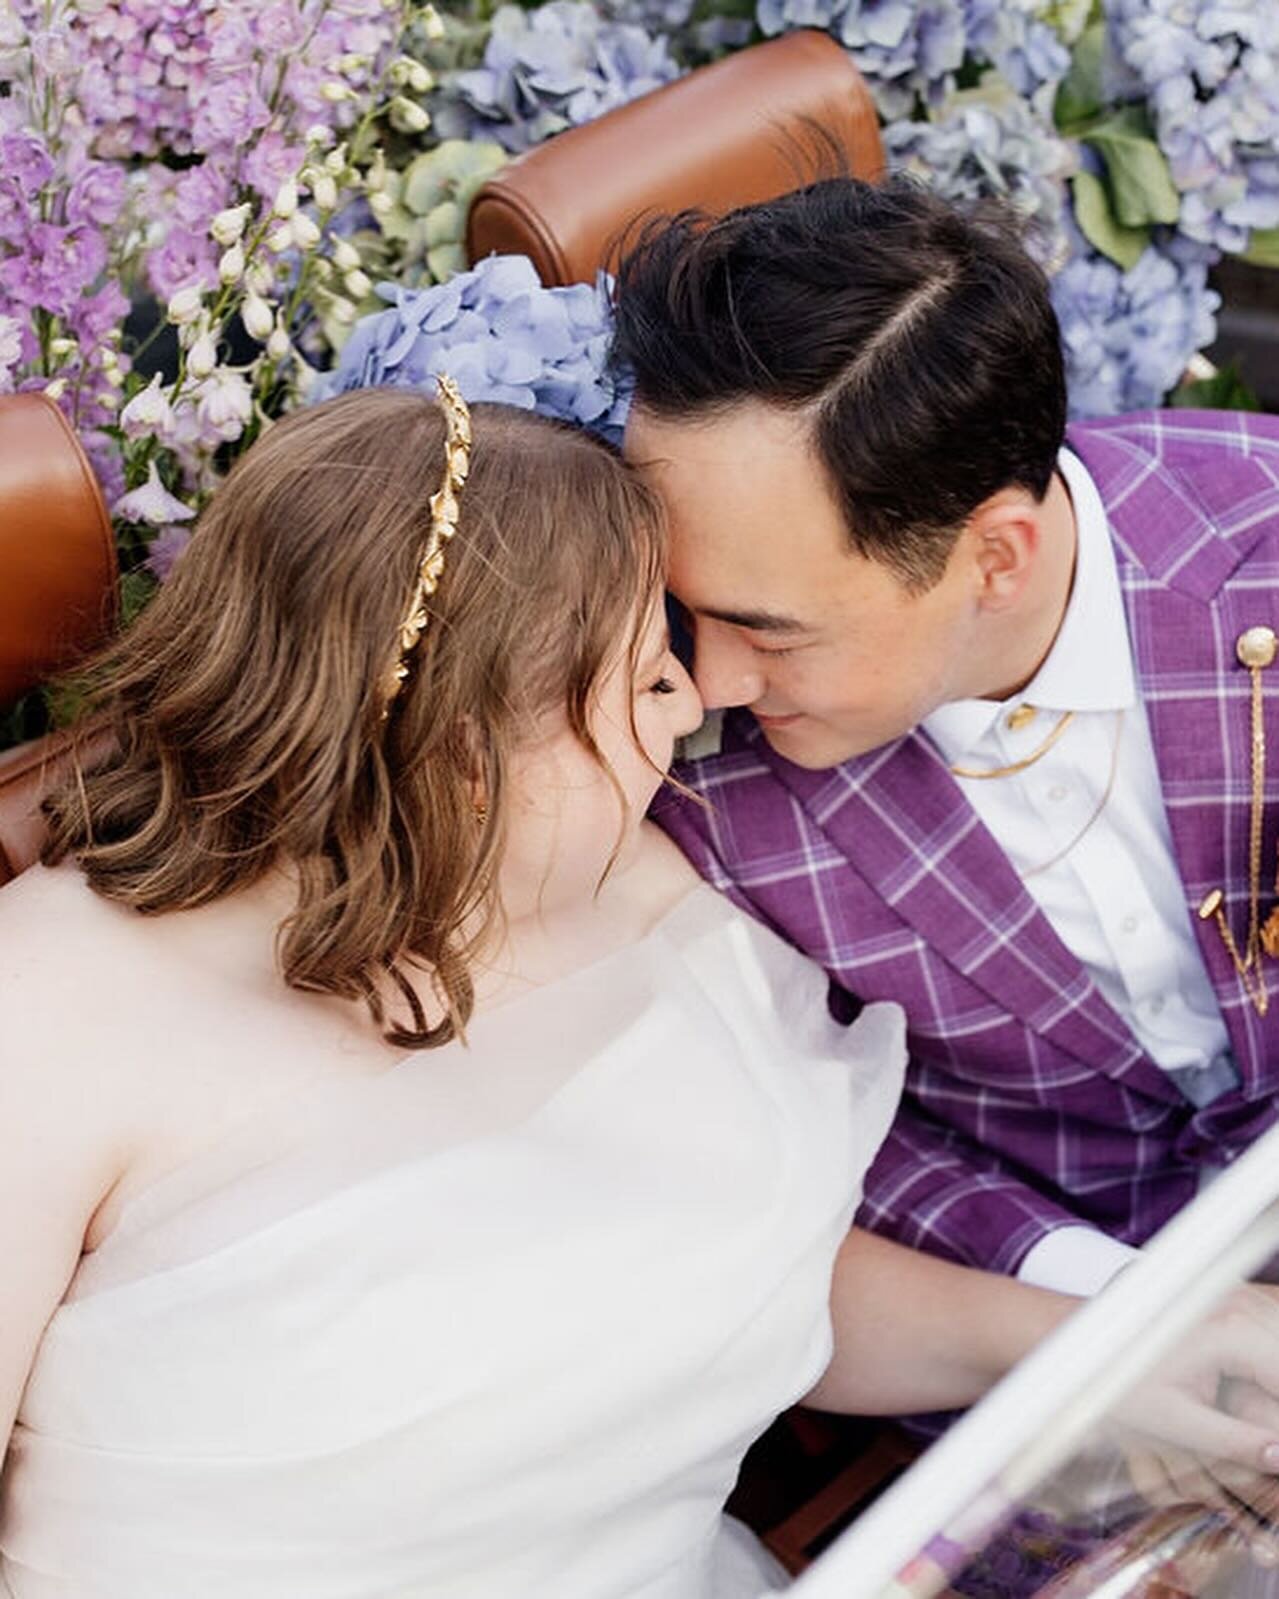 Anastasia and Kim had the sweetest nuptial at Anastasia&rsquo;s parent&rsquo;s gorgeous property. With the most amazing view and colour palette, not to mention that car moment, the day was a beautiful reflection of their love and commitment to each o